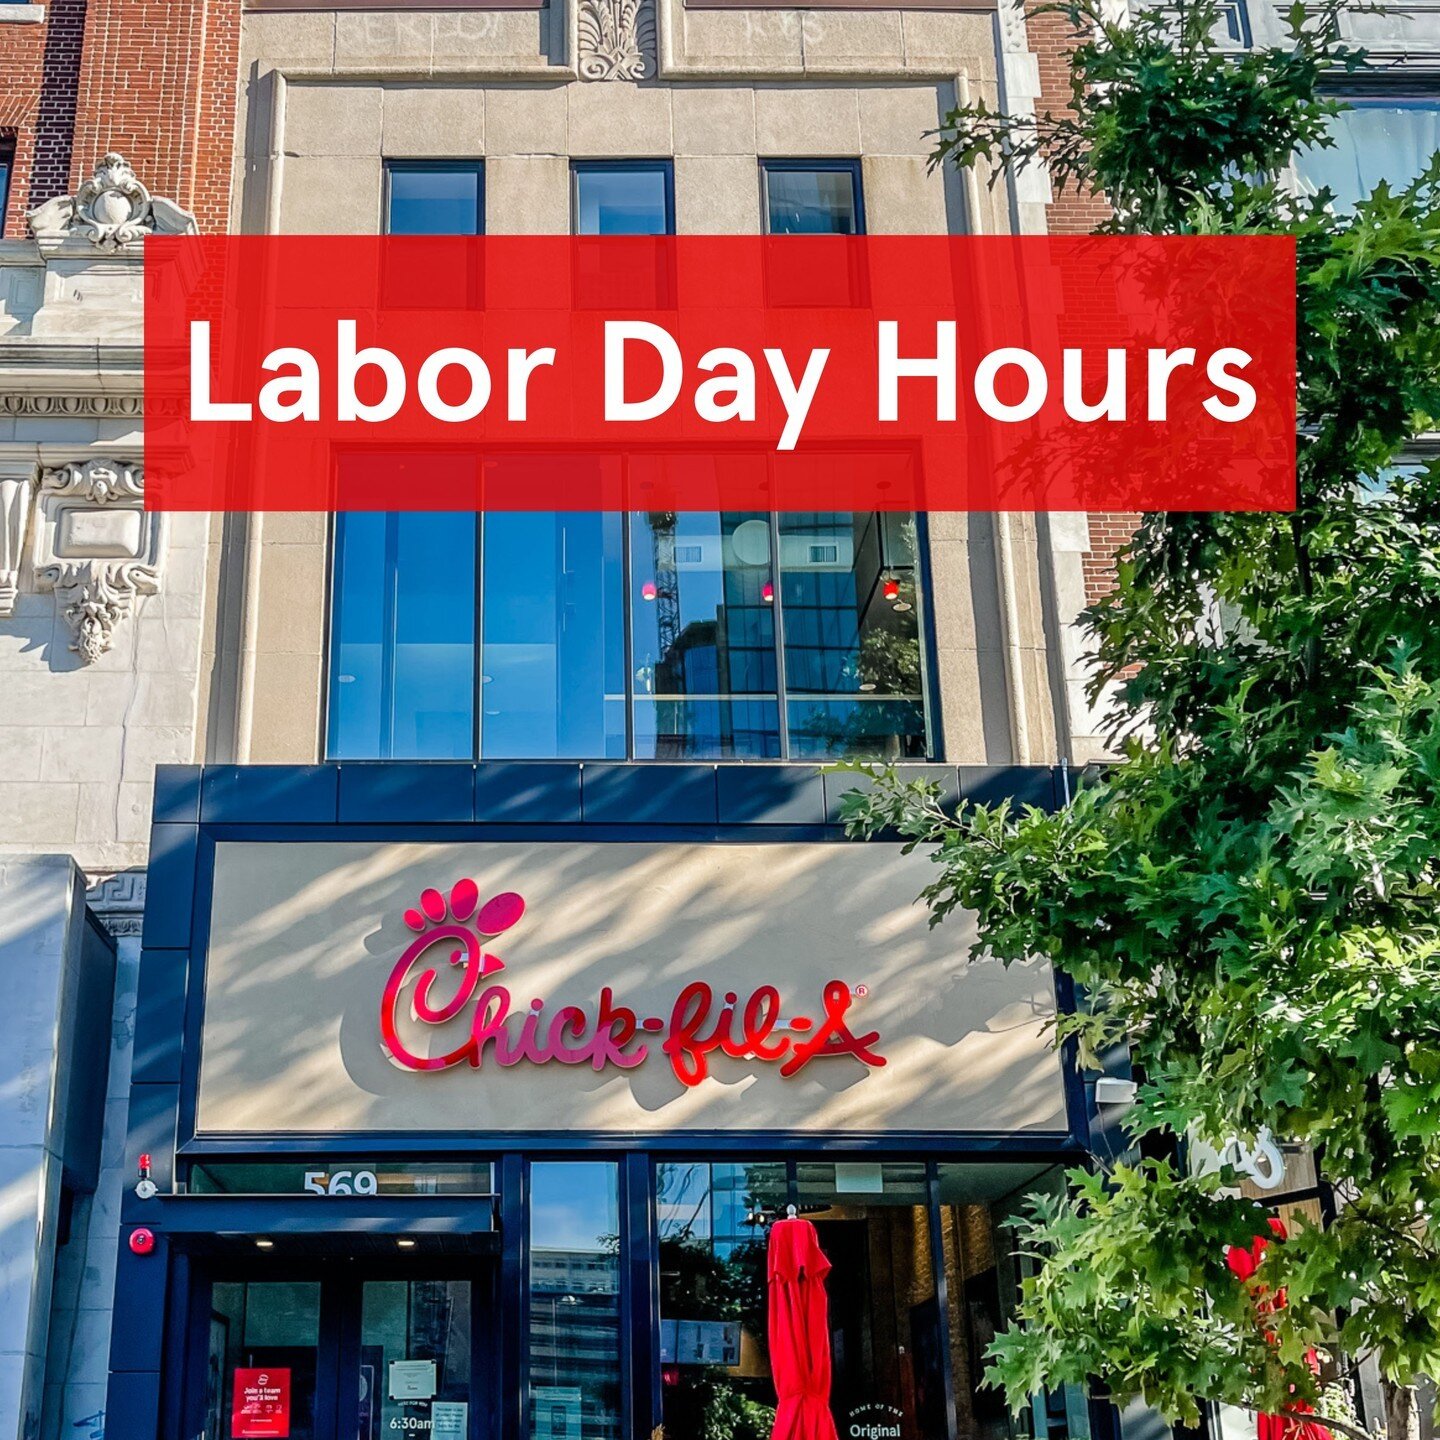 In observance of Labor Day, our hours at Chick-fil-A Copley Square will be 10:30am - 9:00pm on Monday, September 5th. No breakfast will be served.
&bull;
&bull;
&bull;
#TheLittleThings #ChickfilA #MyPleasure #EatMoreChicken #EatMorChikin #HereToServe